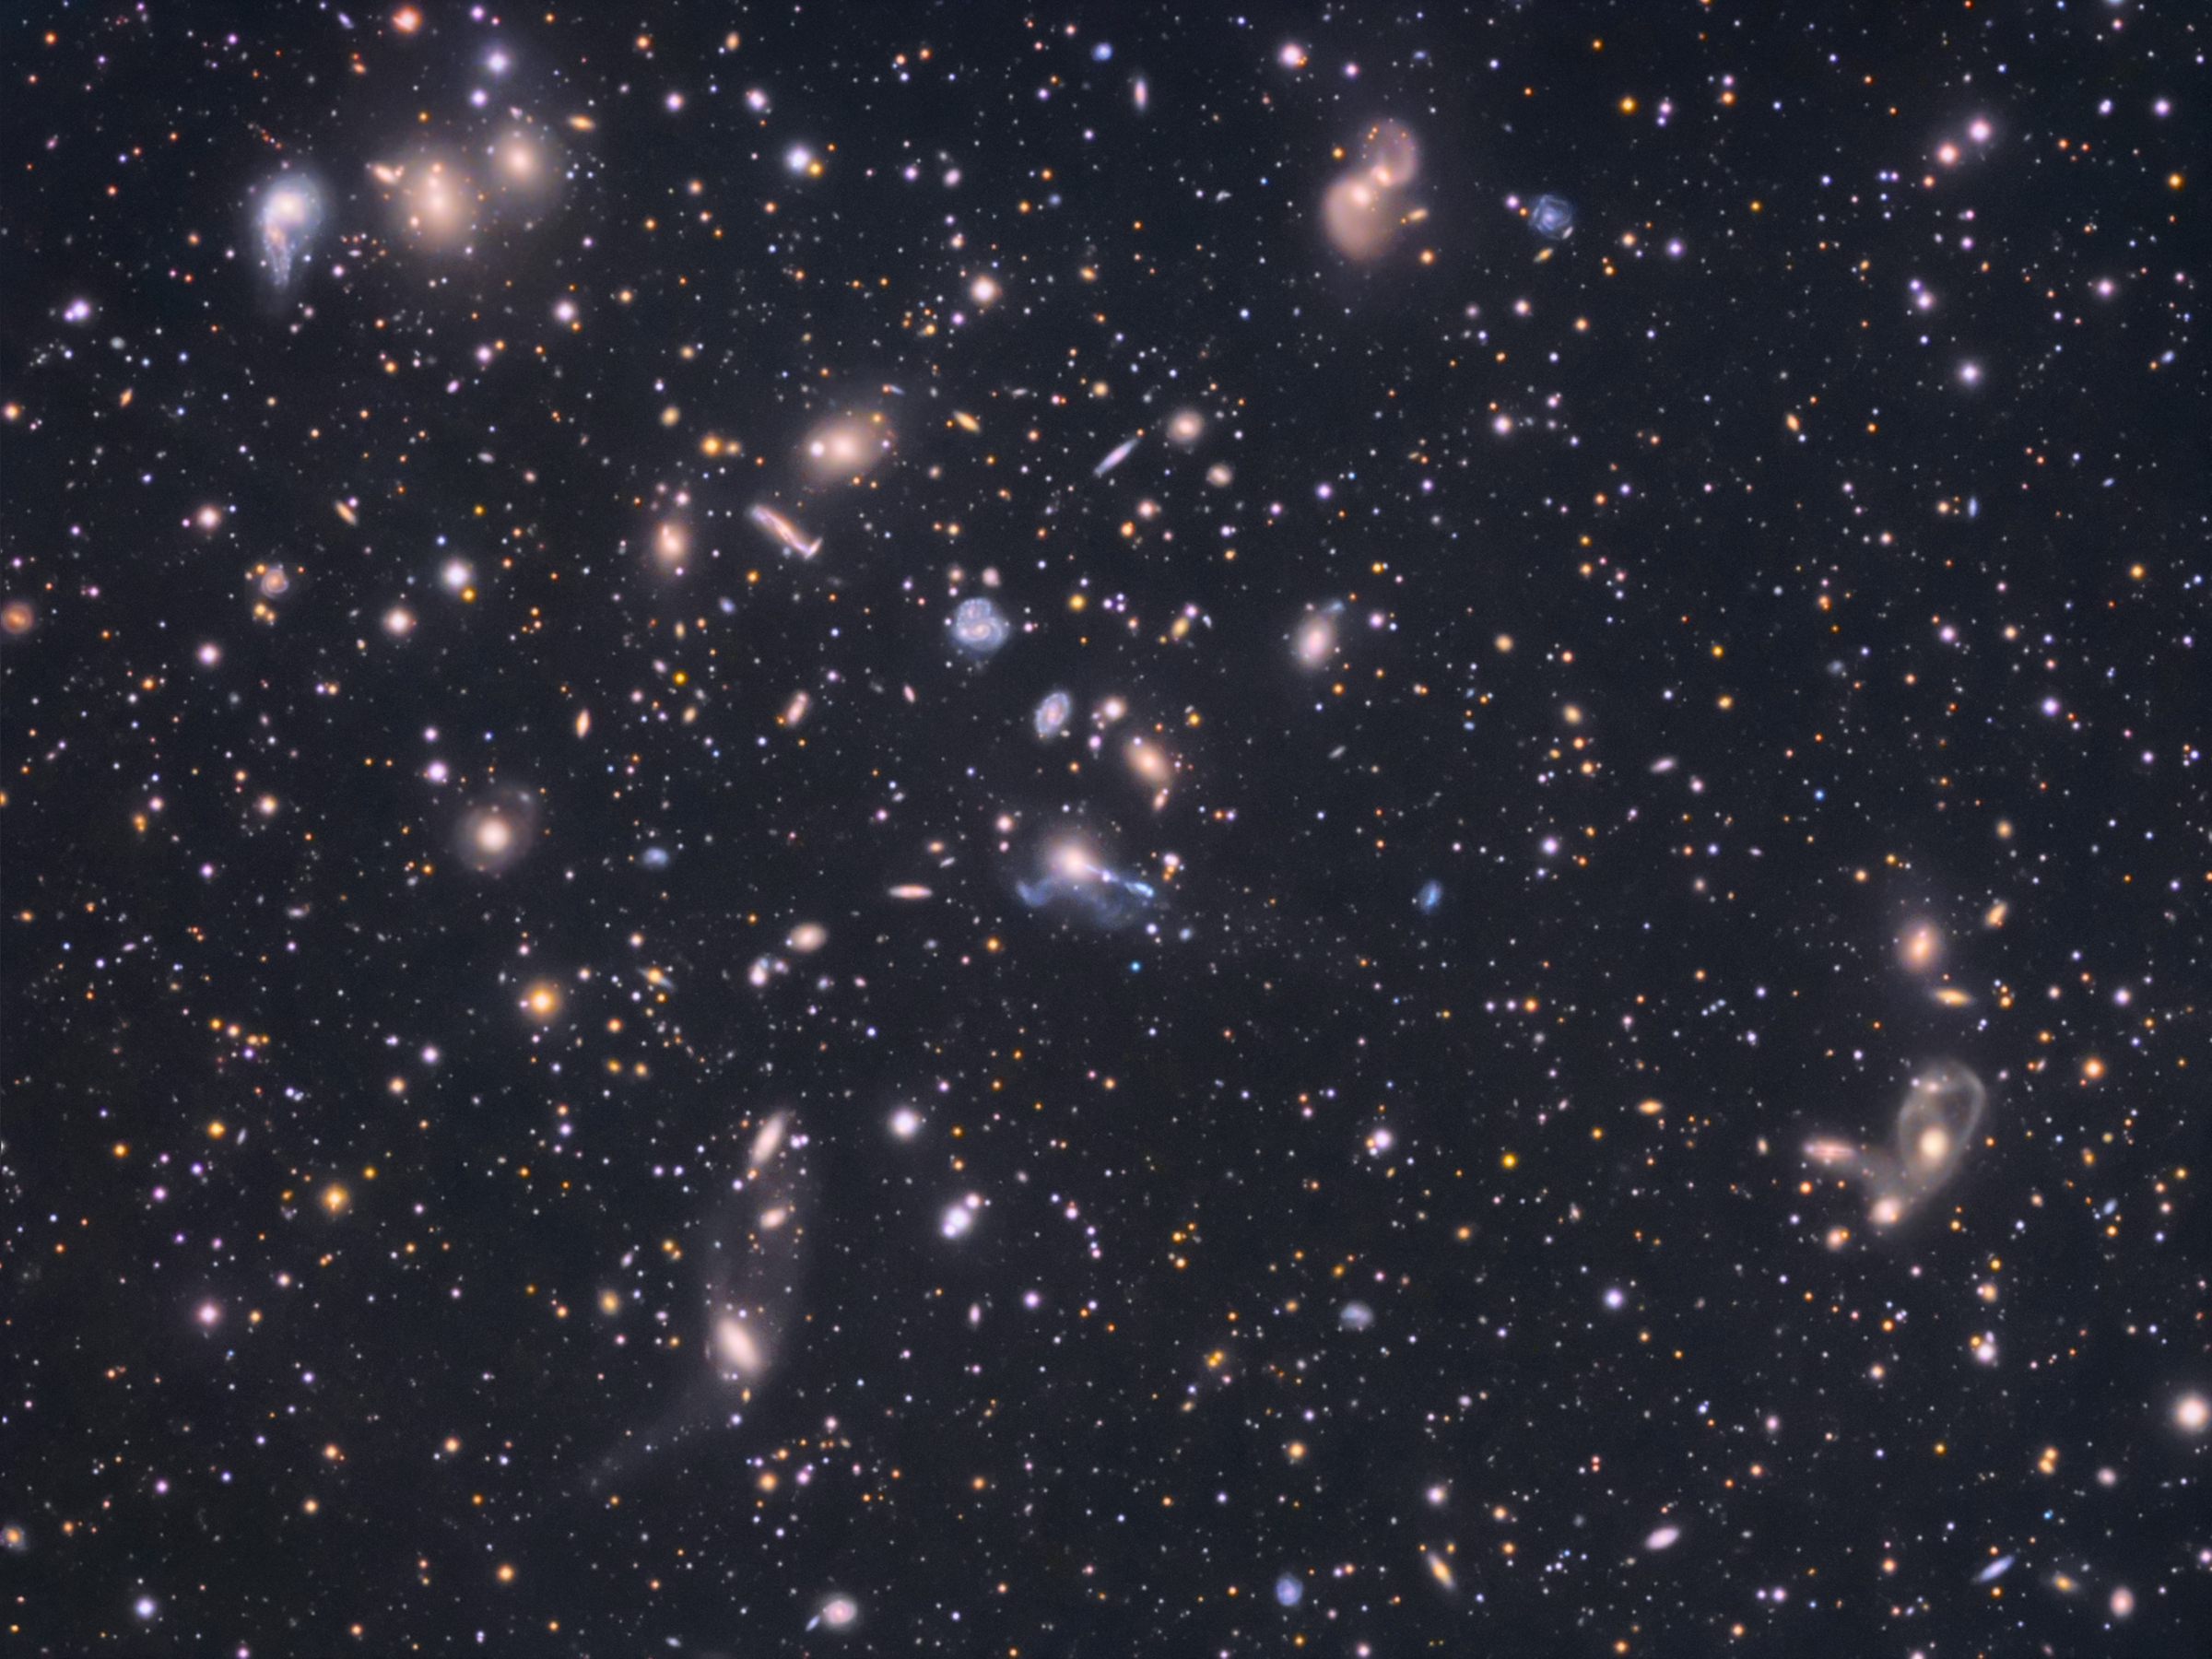 Abell 2151 - The Hercules Cluster of Galaxies by Tony Hallas - Star Image V...